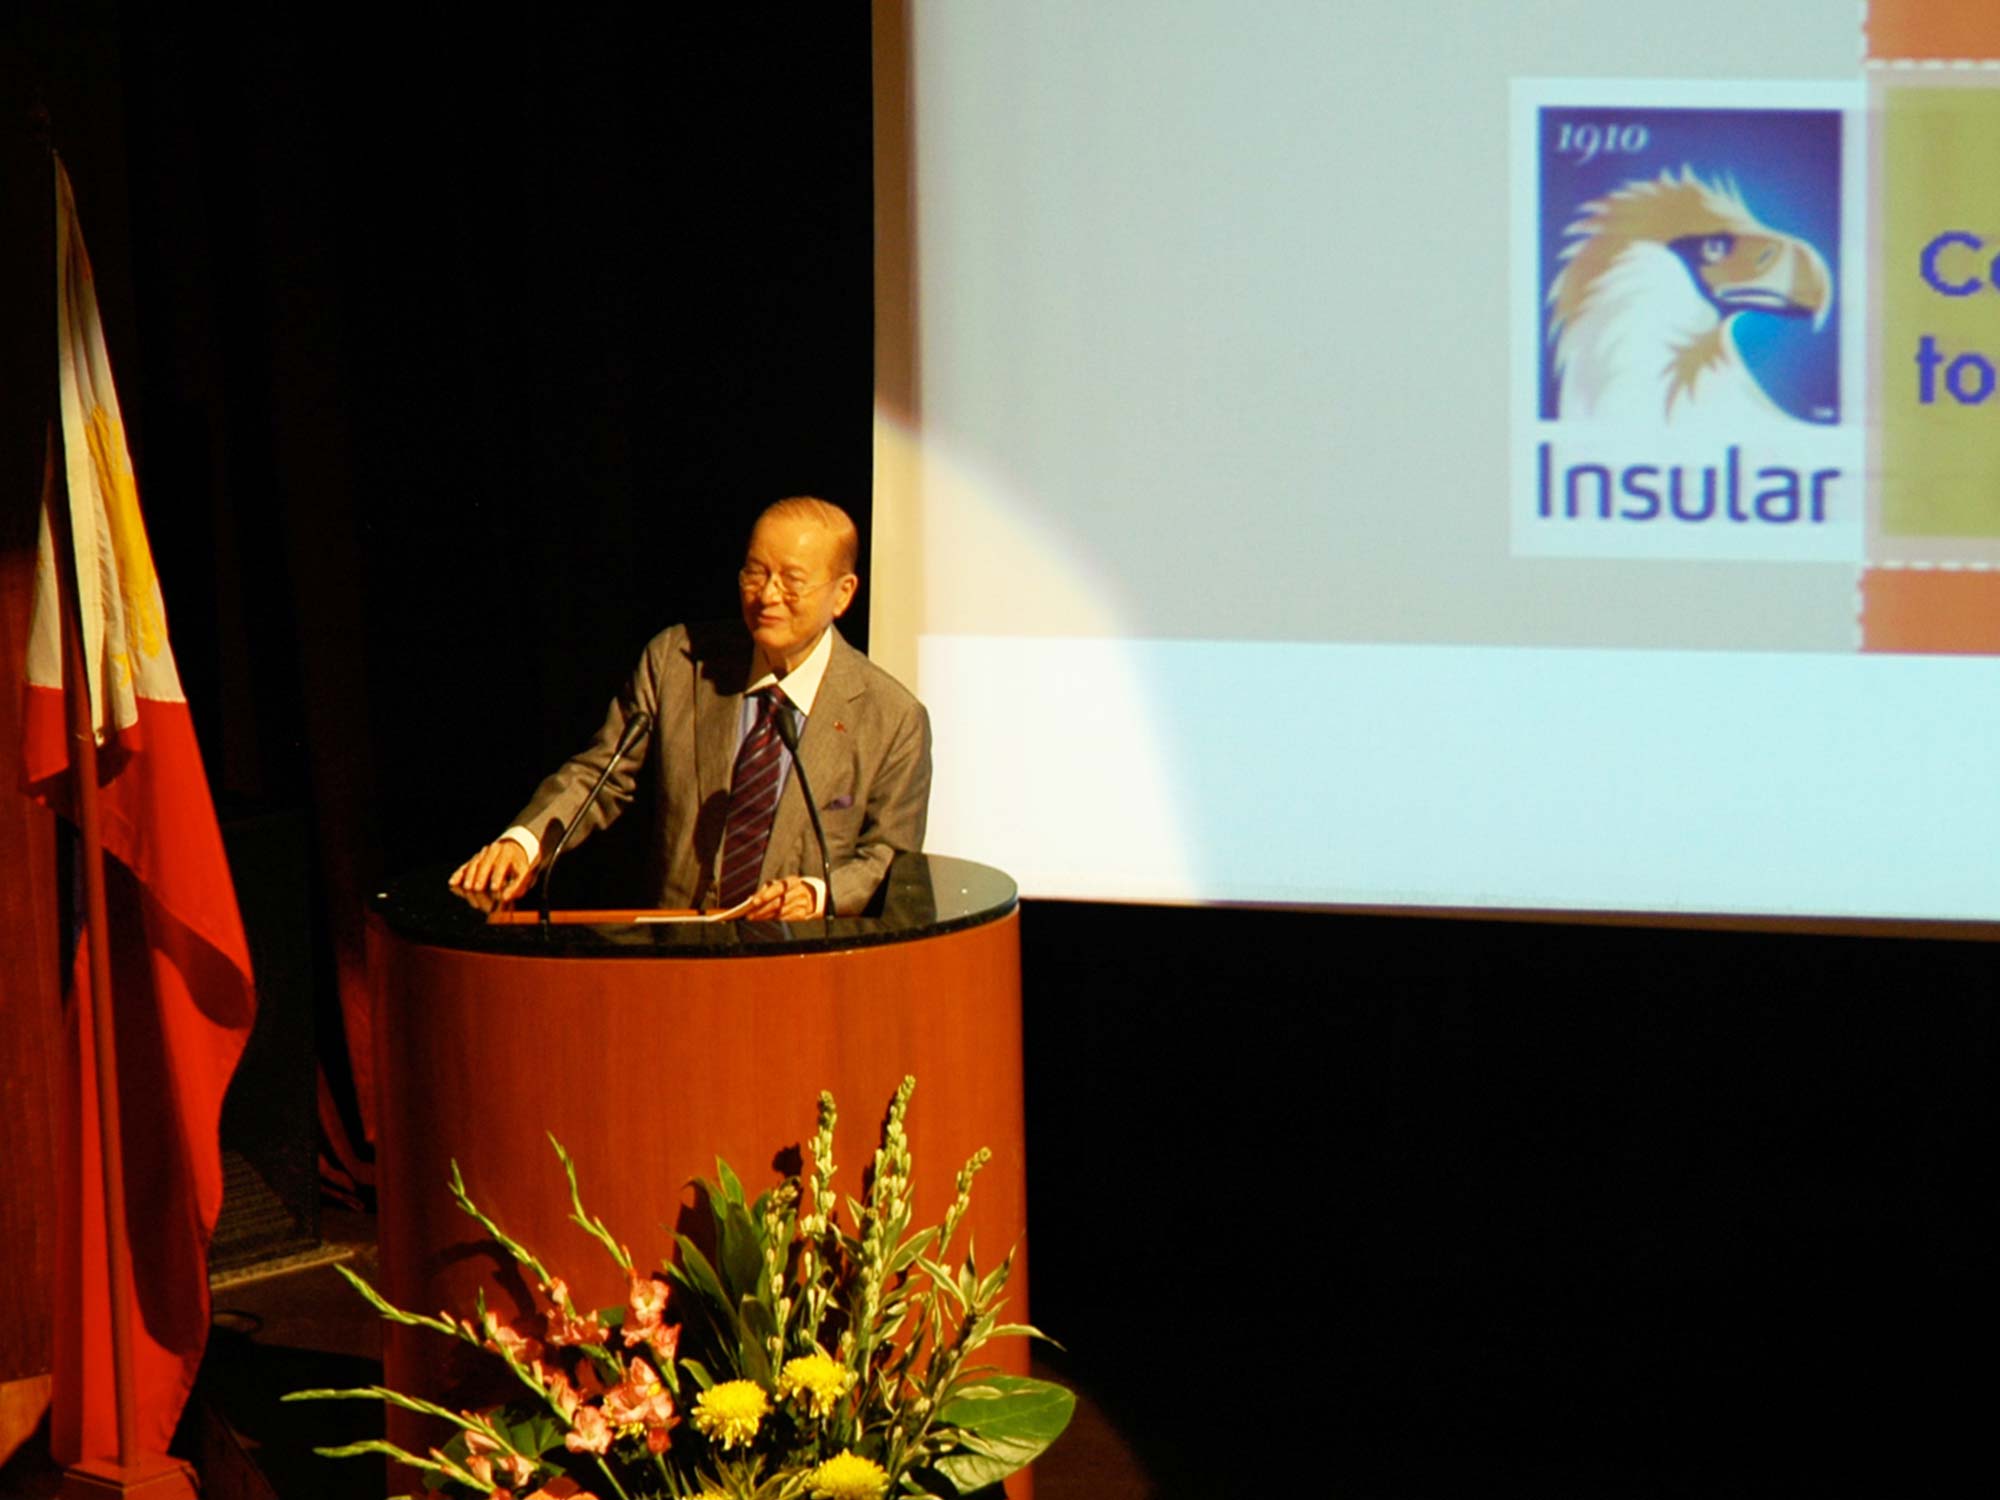 Brand Consultancy in Financial Services Industry. Launch of Insular.